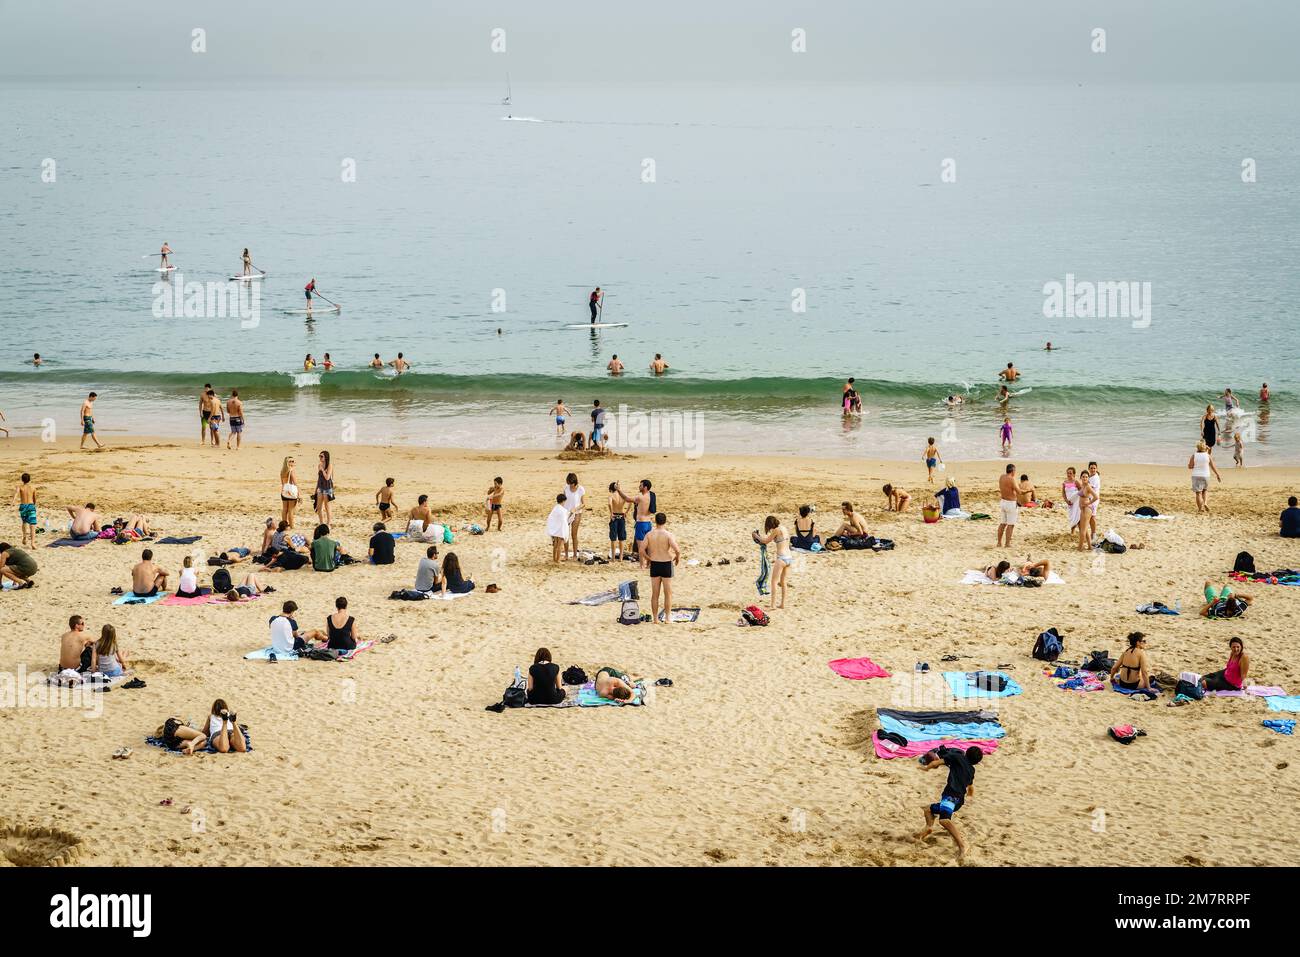 Cascais, Portugal, October 27, 2016: People are enjoying last warm days on a beach in Cascais, Portugal Stock Photo